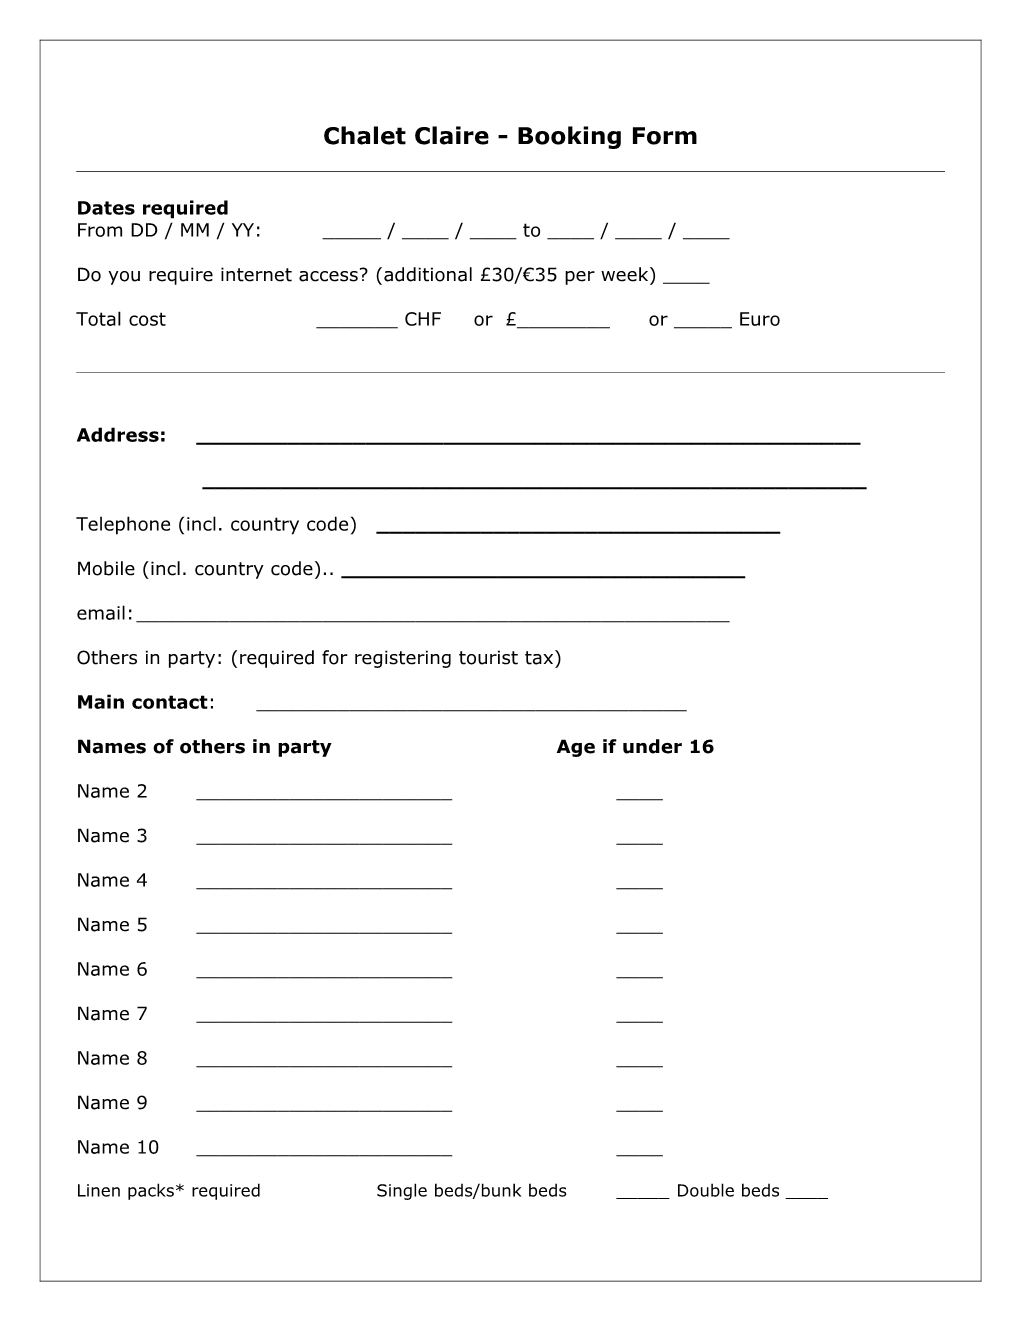 Chalet Claire - Booking Form